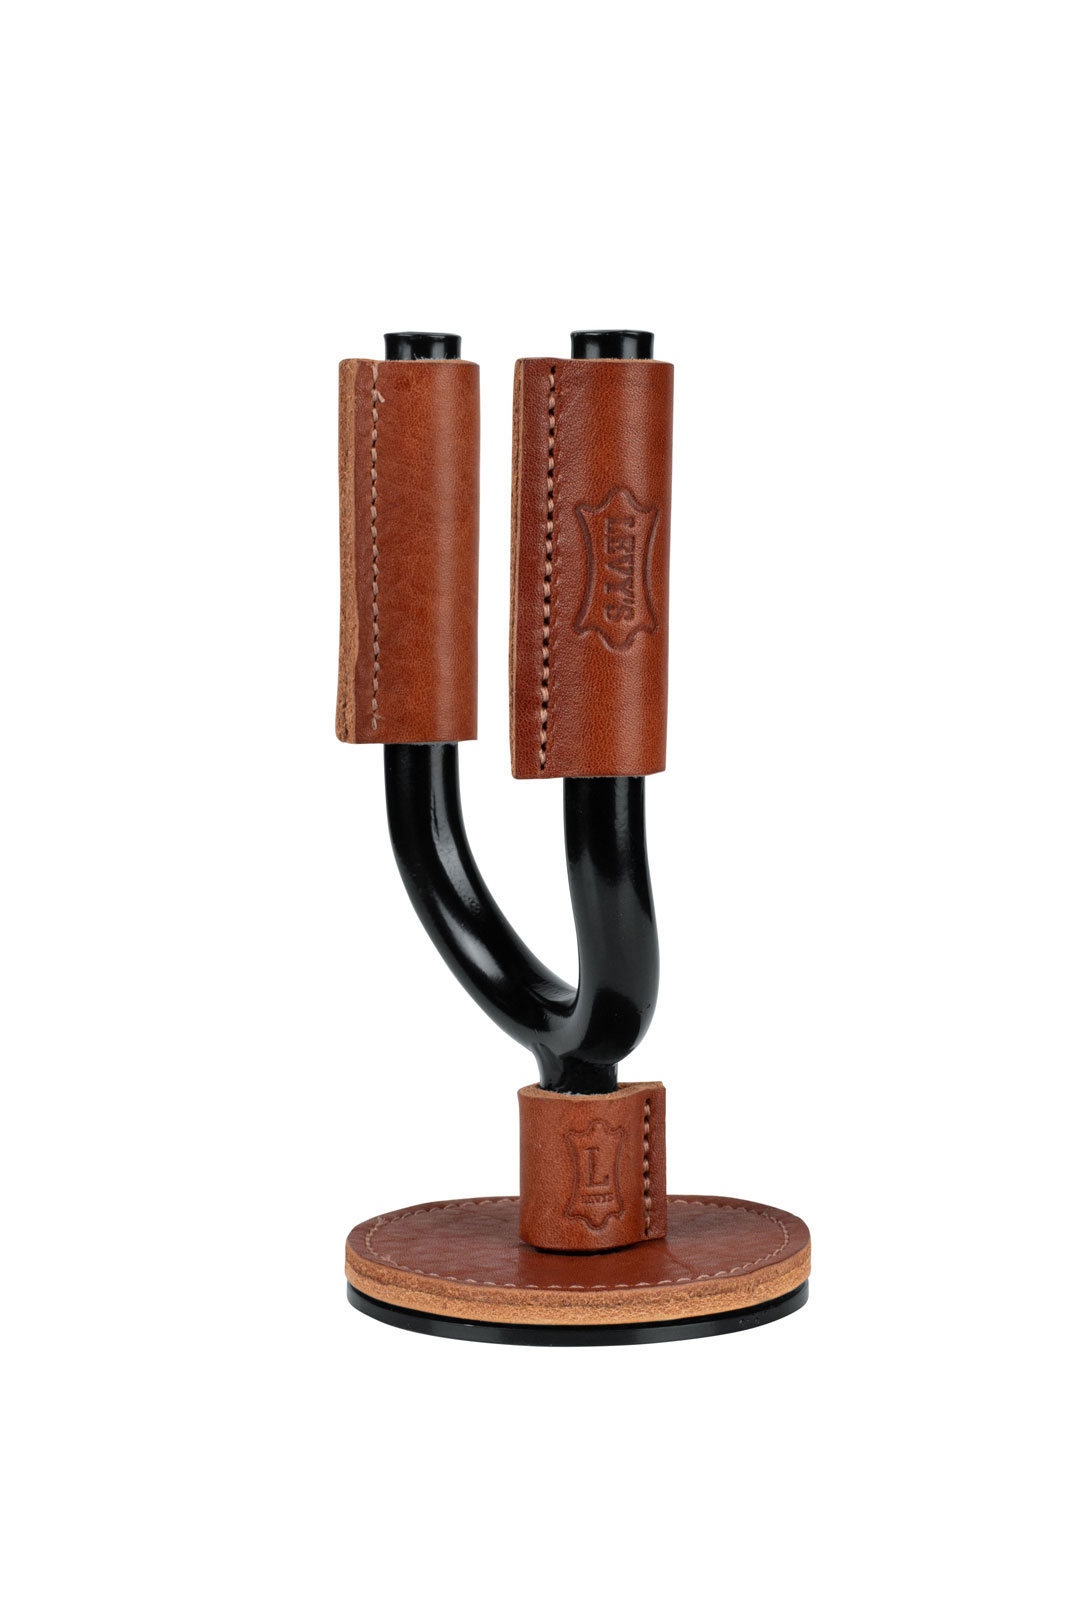 LEVY'S FGHNGR-BKTN BLACK WROUGHT IRON WALL STAND WITH LEATHER PROTECTIONS